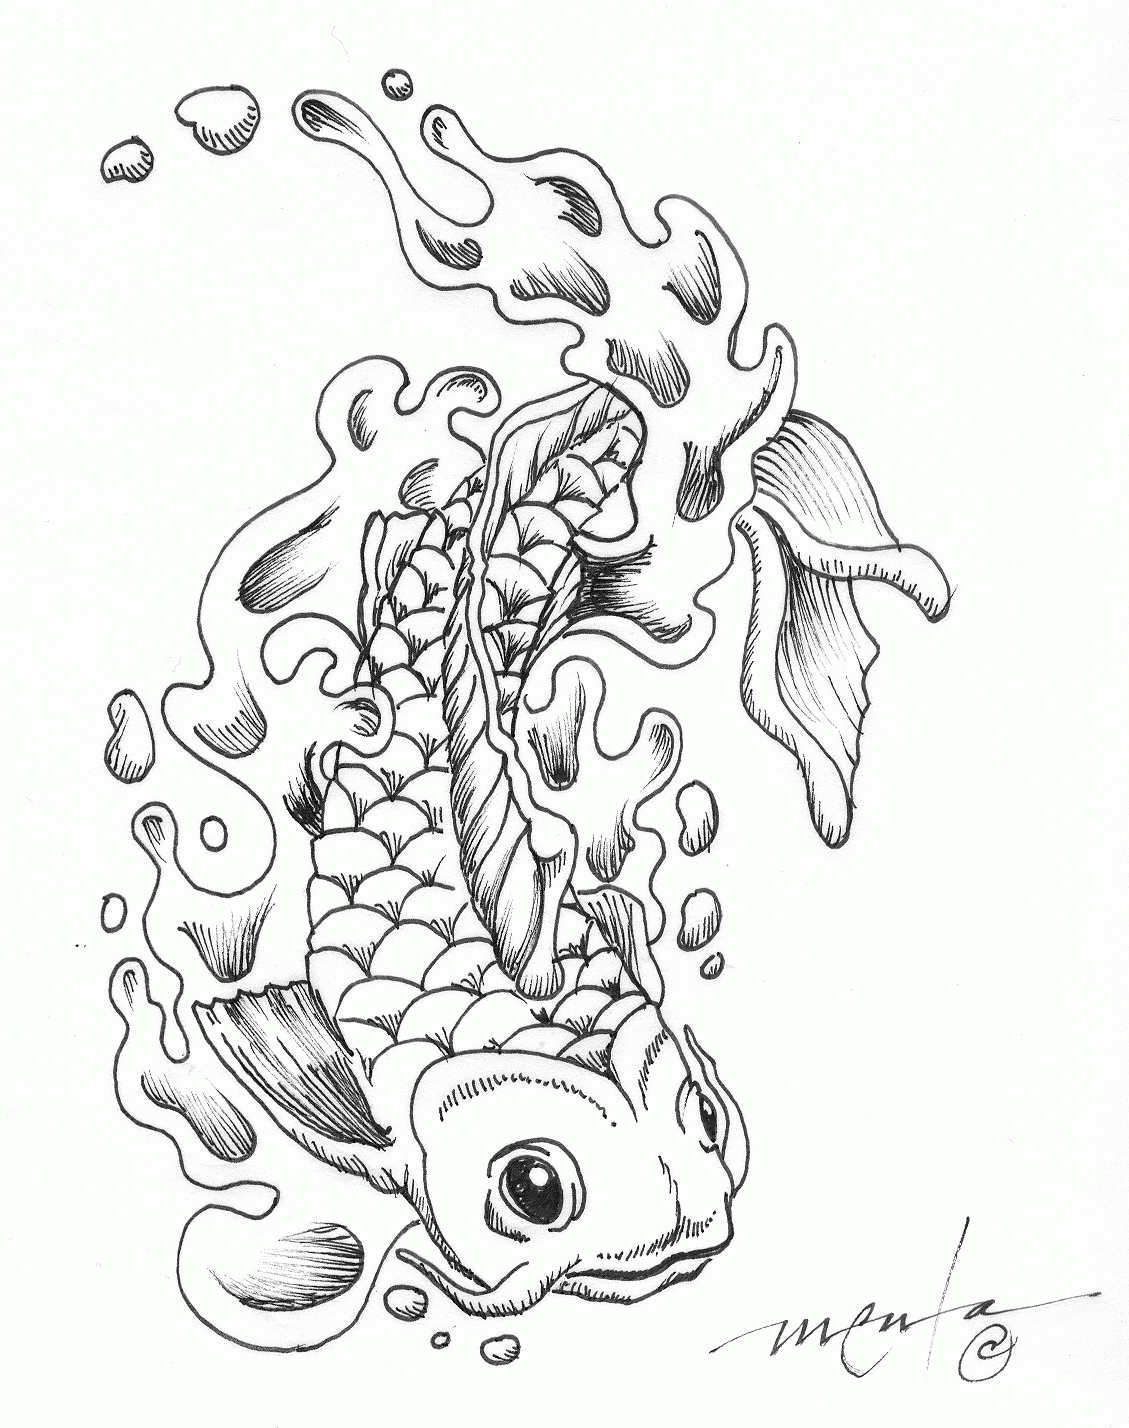 Koi Coloring Pages - Coloring Home